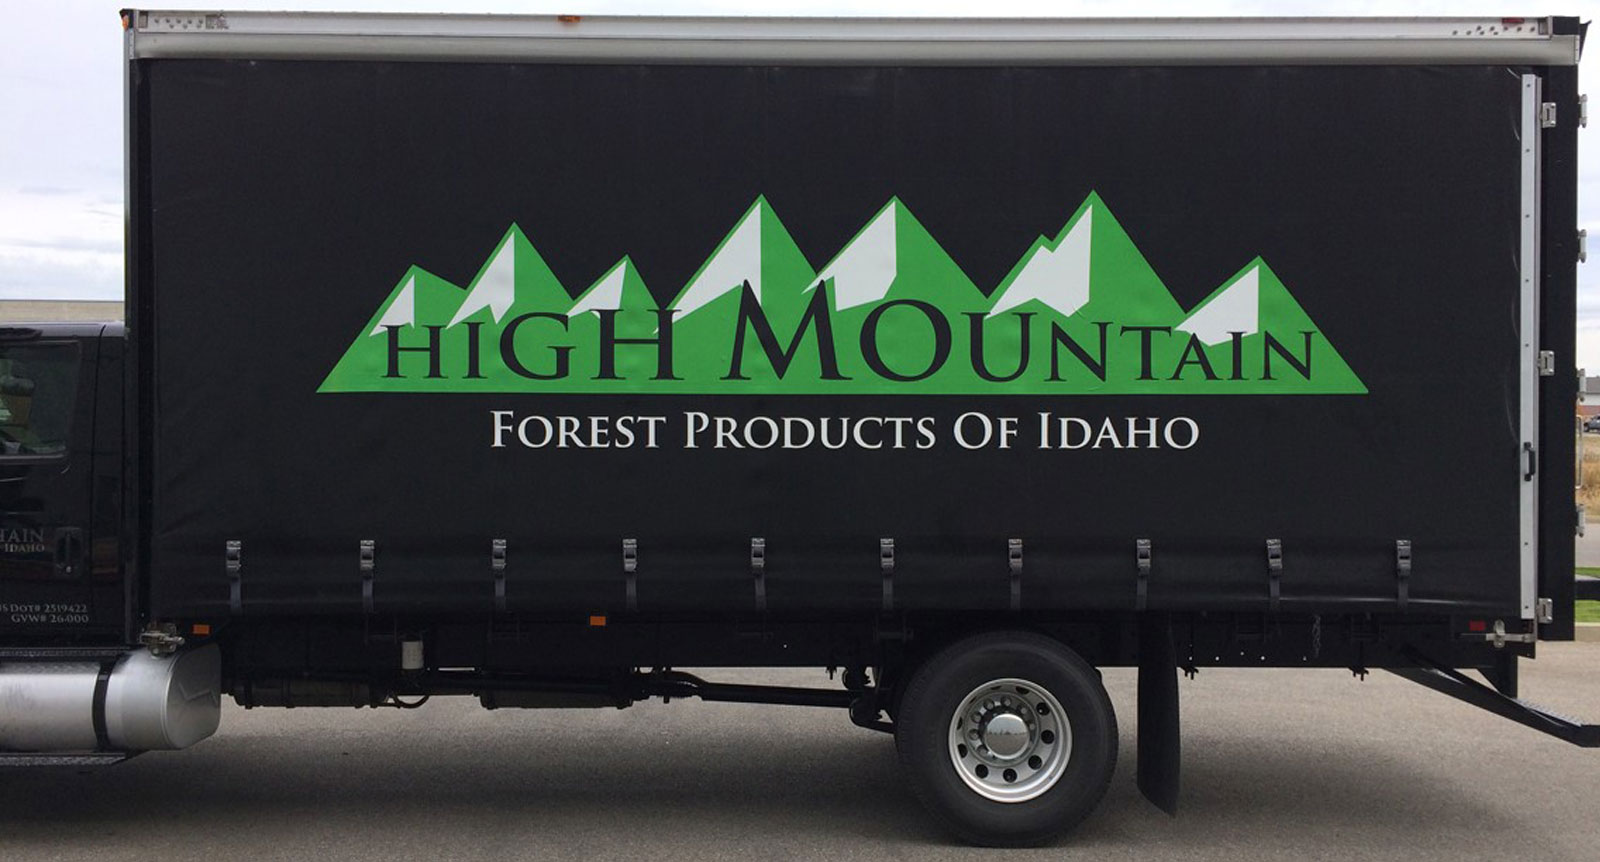 UCS Forest Group Acquires High Mountain Forest Products of Idaho LLC